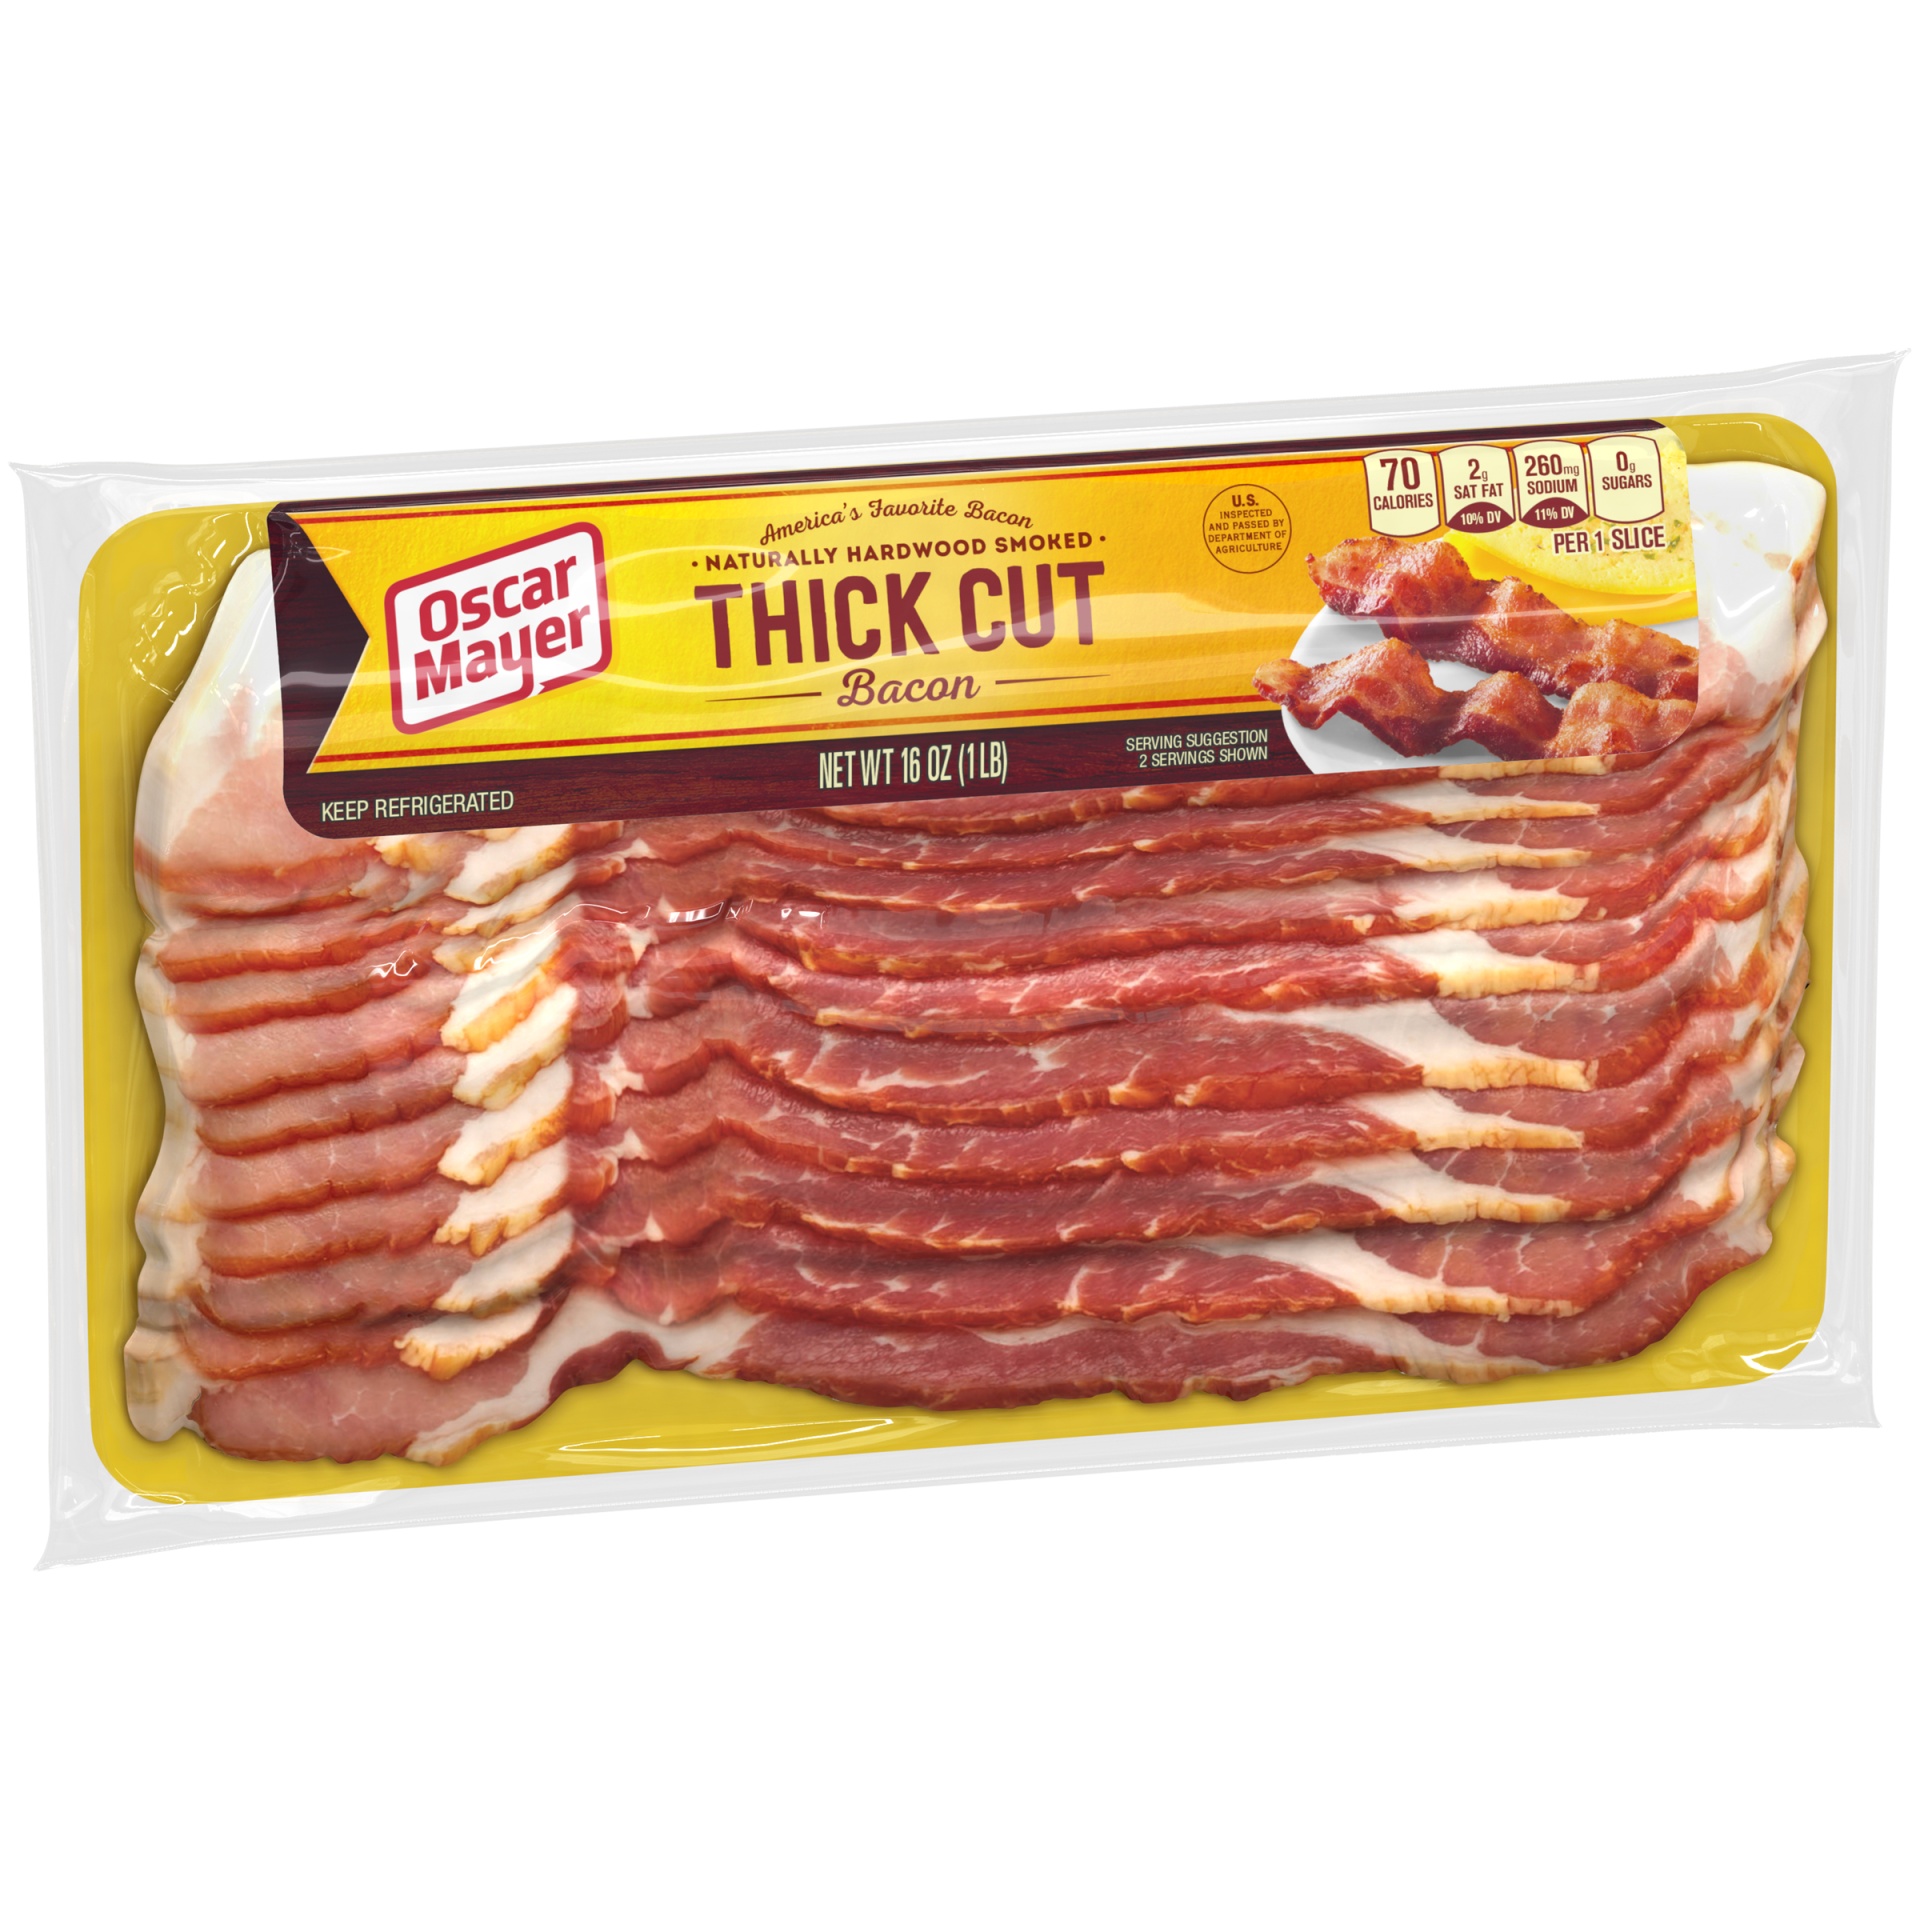 slide 8 of 12, Oscar Mayer Naturally Hardwood Smoked Thick Cut Bacon Pack, 11-13 slices, 16 oz